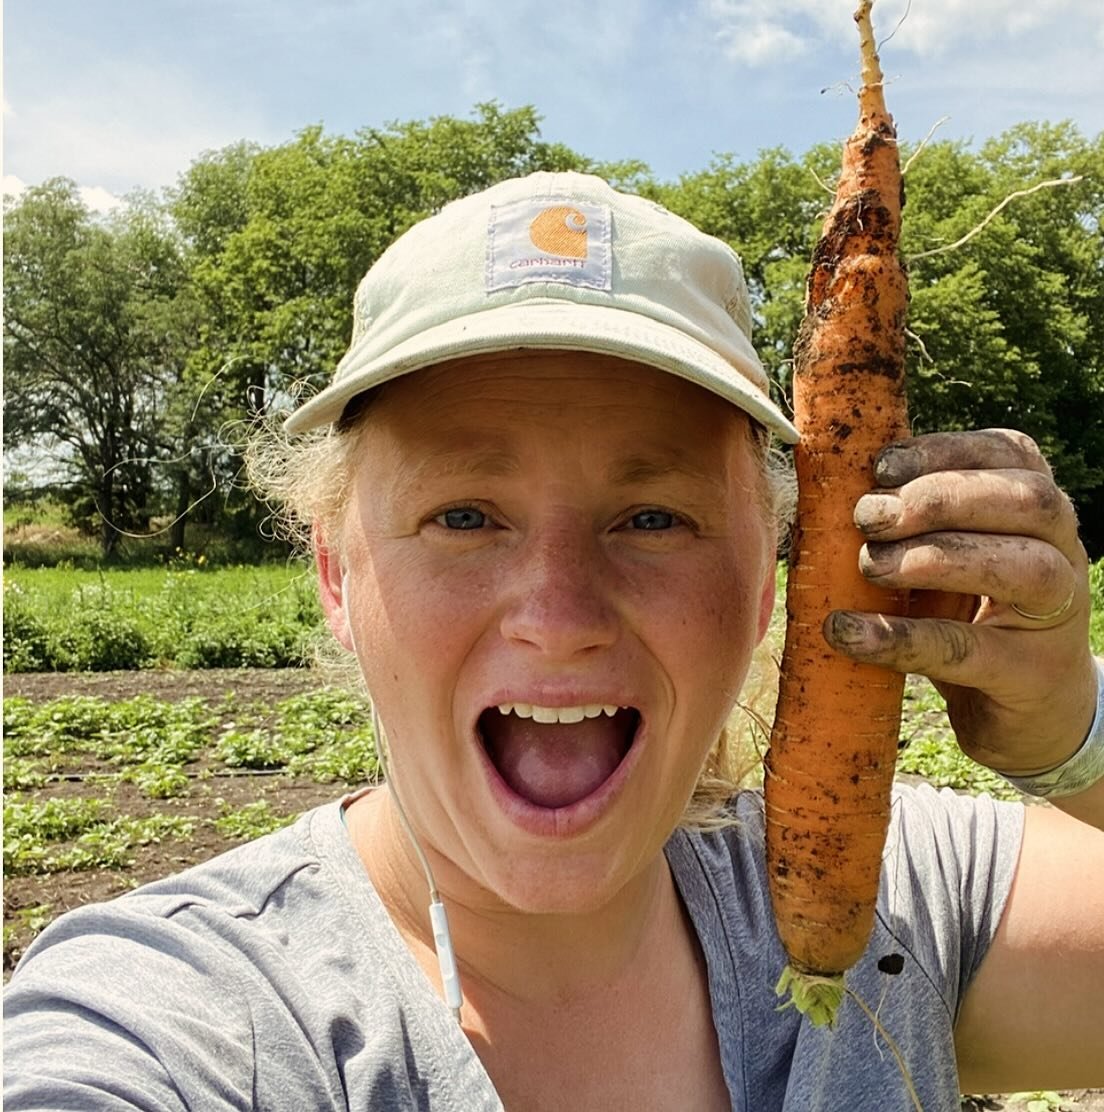 Meet our newest board member! Kjersten Oudman from @blueskyveg is our new Secretary and we are thrilled to welcome her, as well as @blueskyveg as one of our newest producers this year. As you can see, Kjersten is an ag veteran and is going to add so 